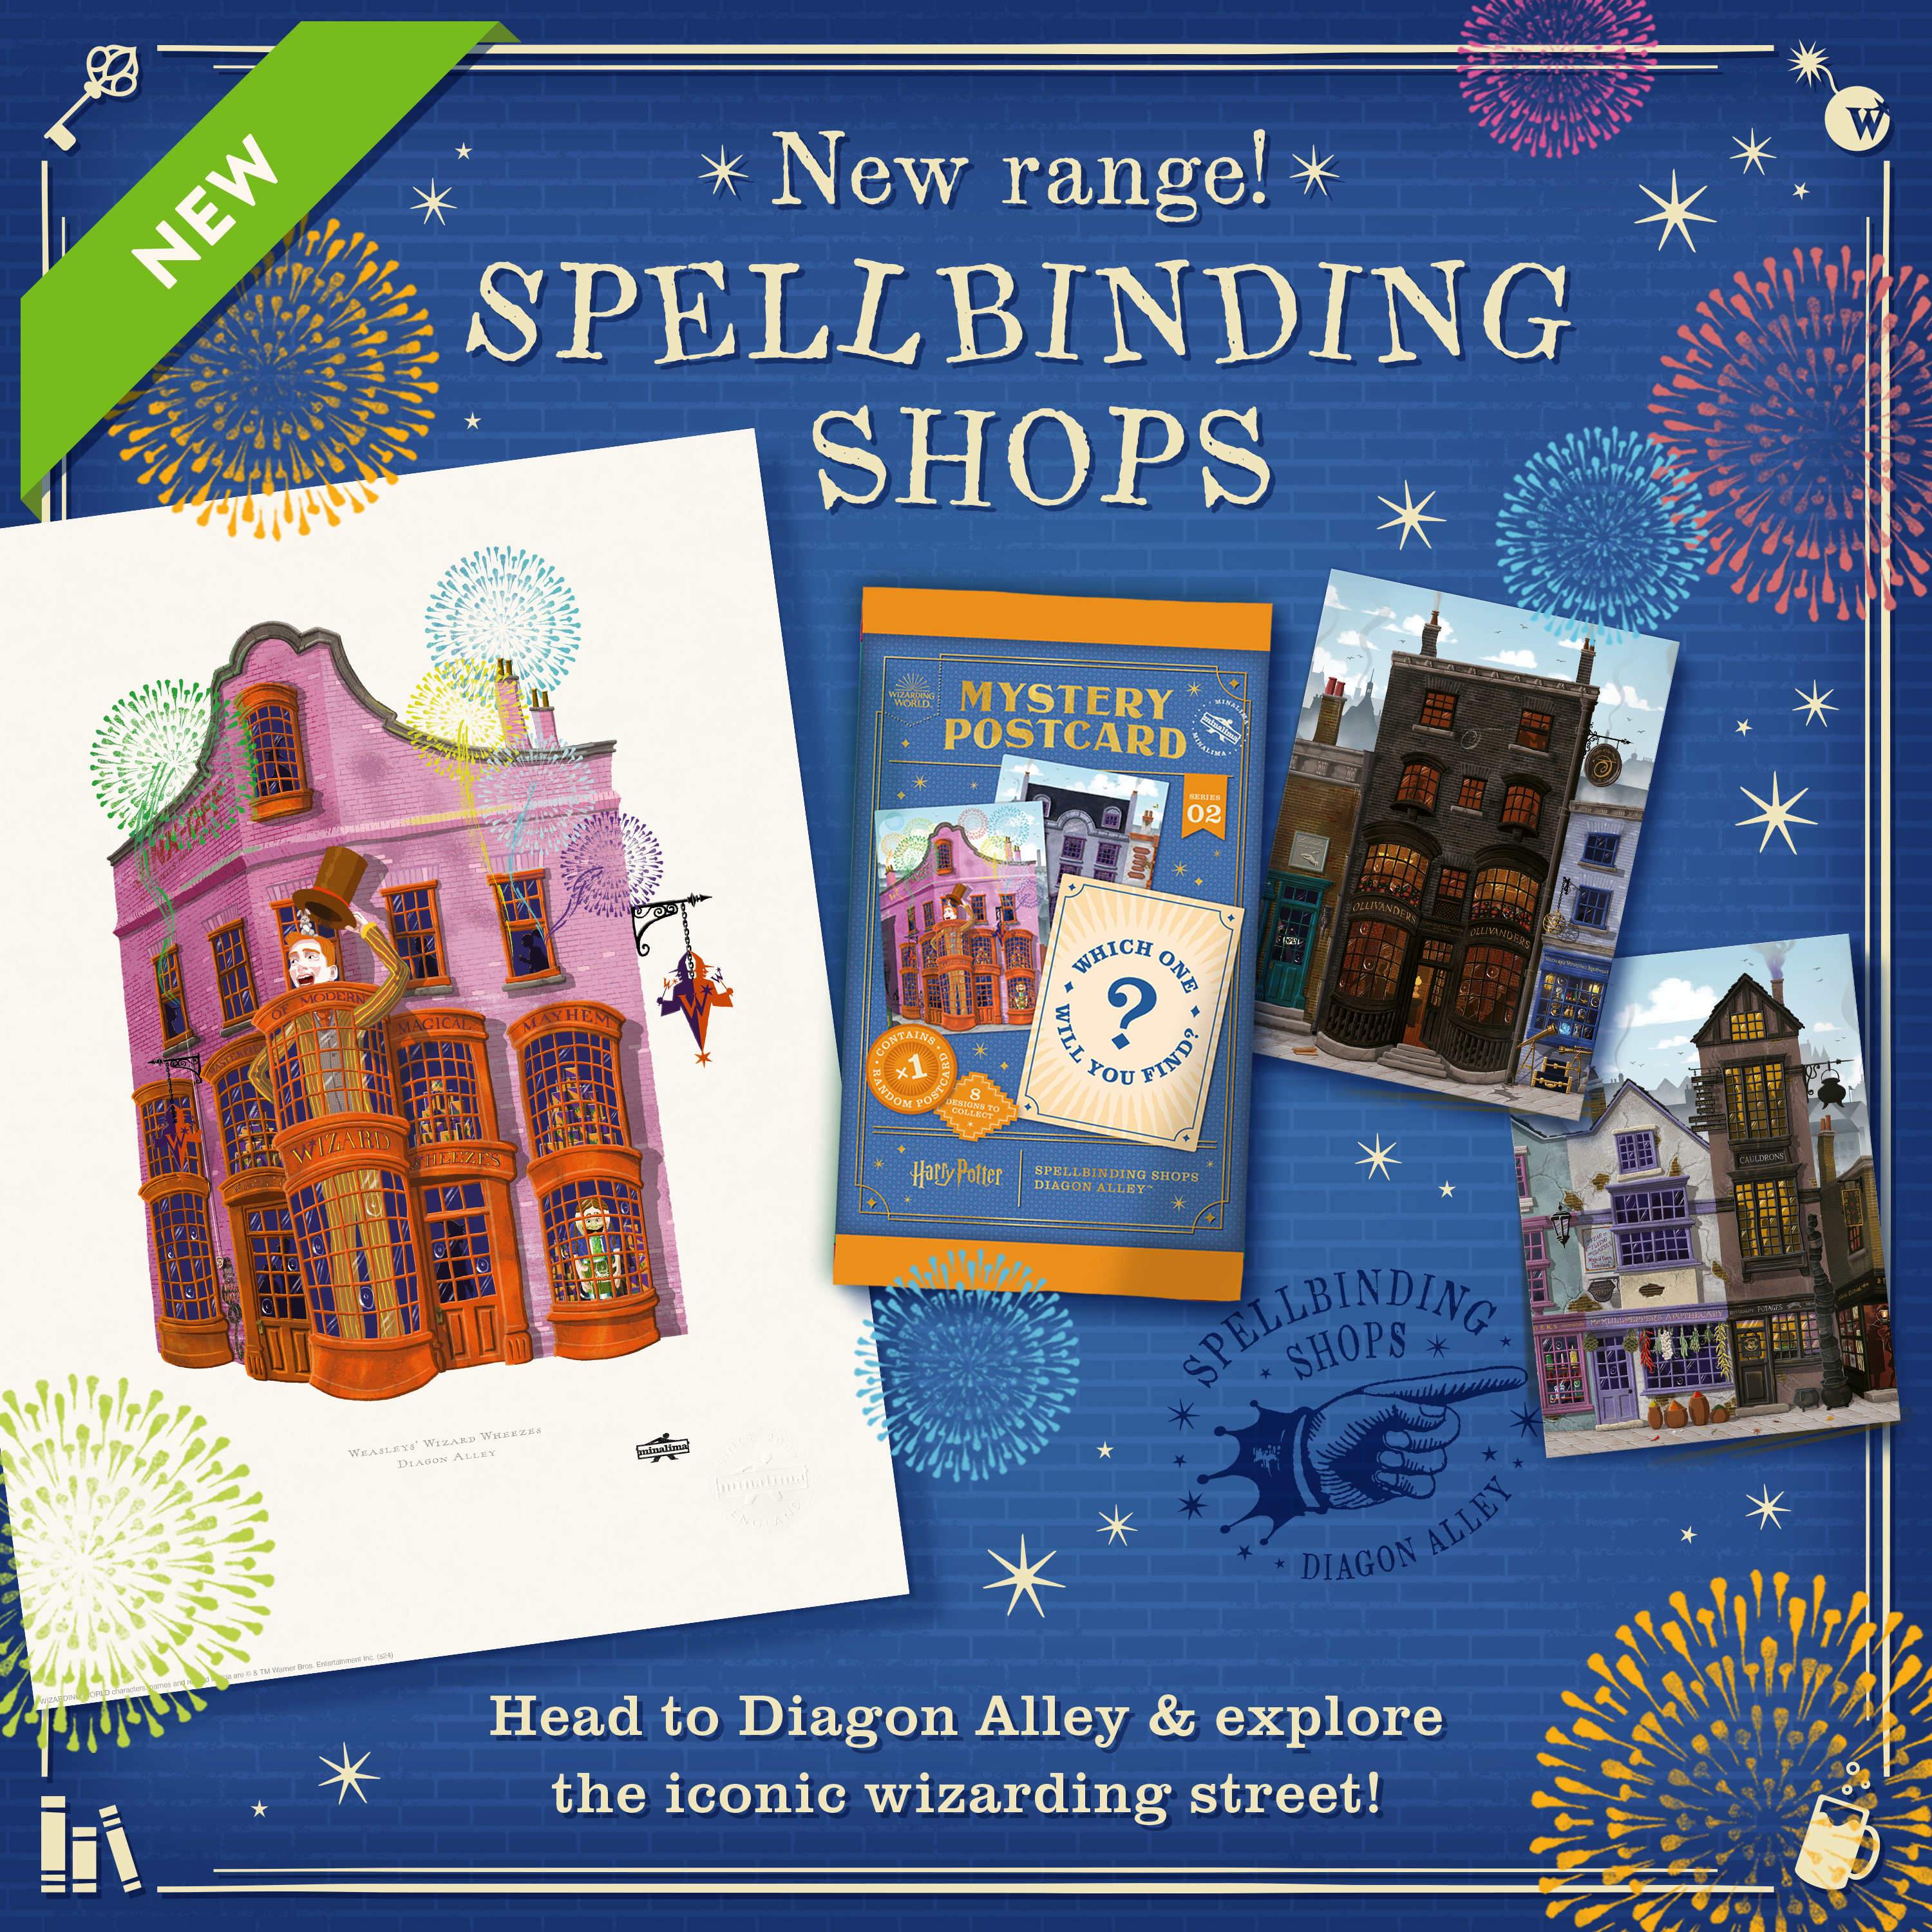 New range! Spellbinding Shops. Head to Diagon Alley and explore the iconic wizarding street!